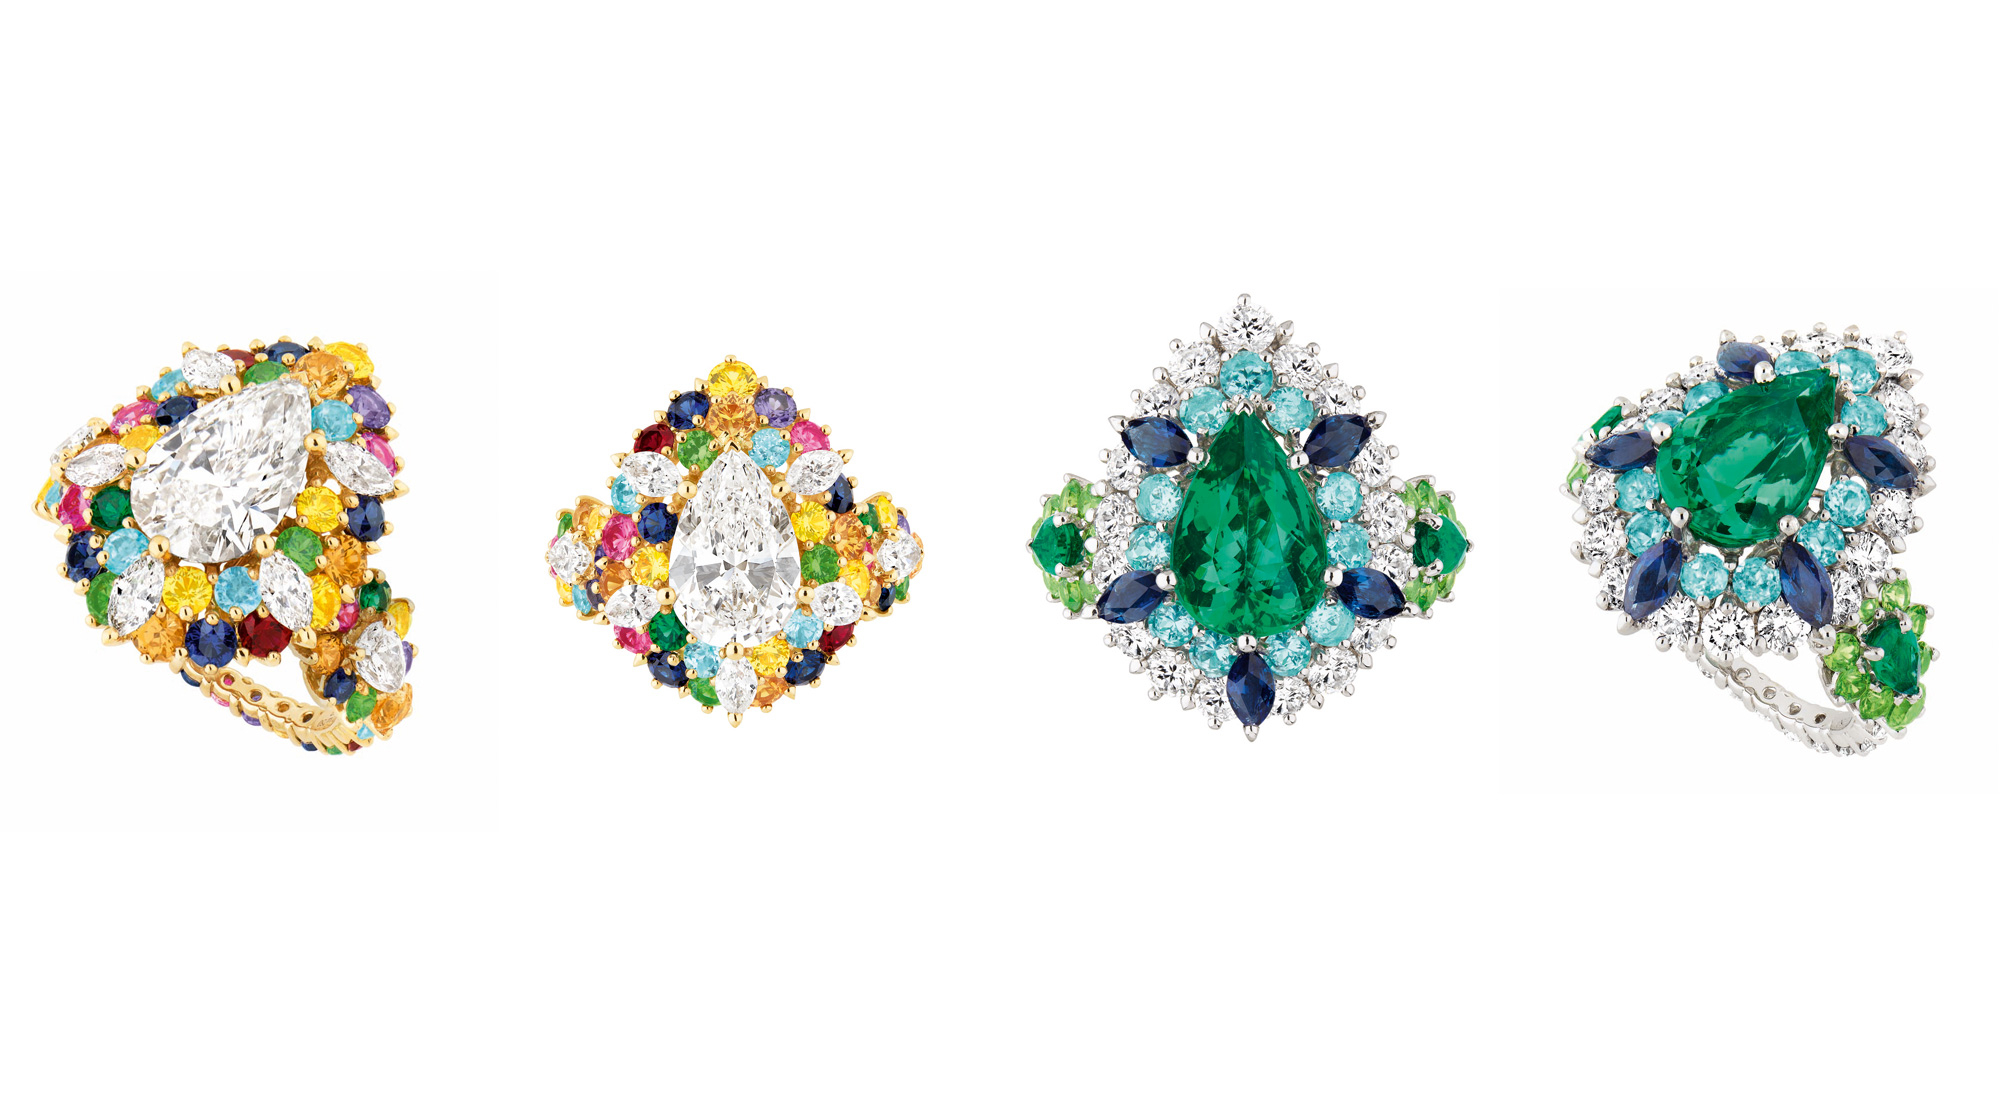 Cher Dior”, the new Dior high jewelry collection - LVMH